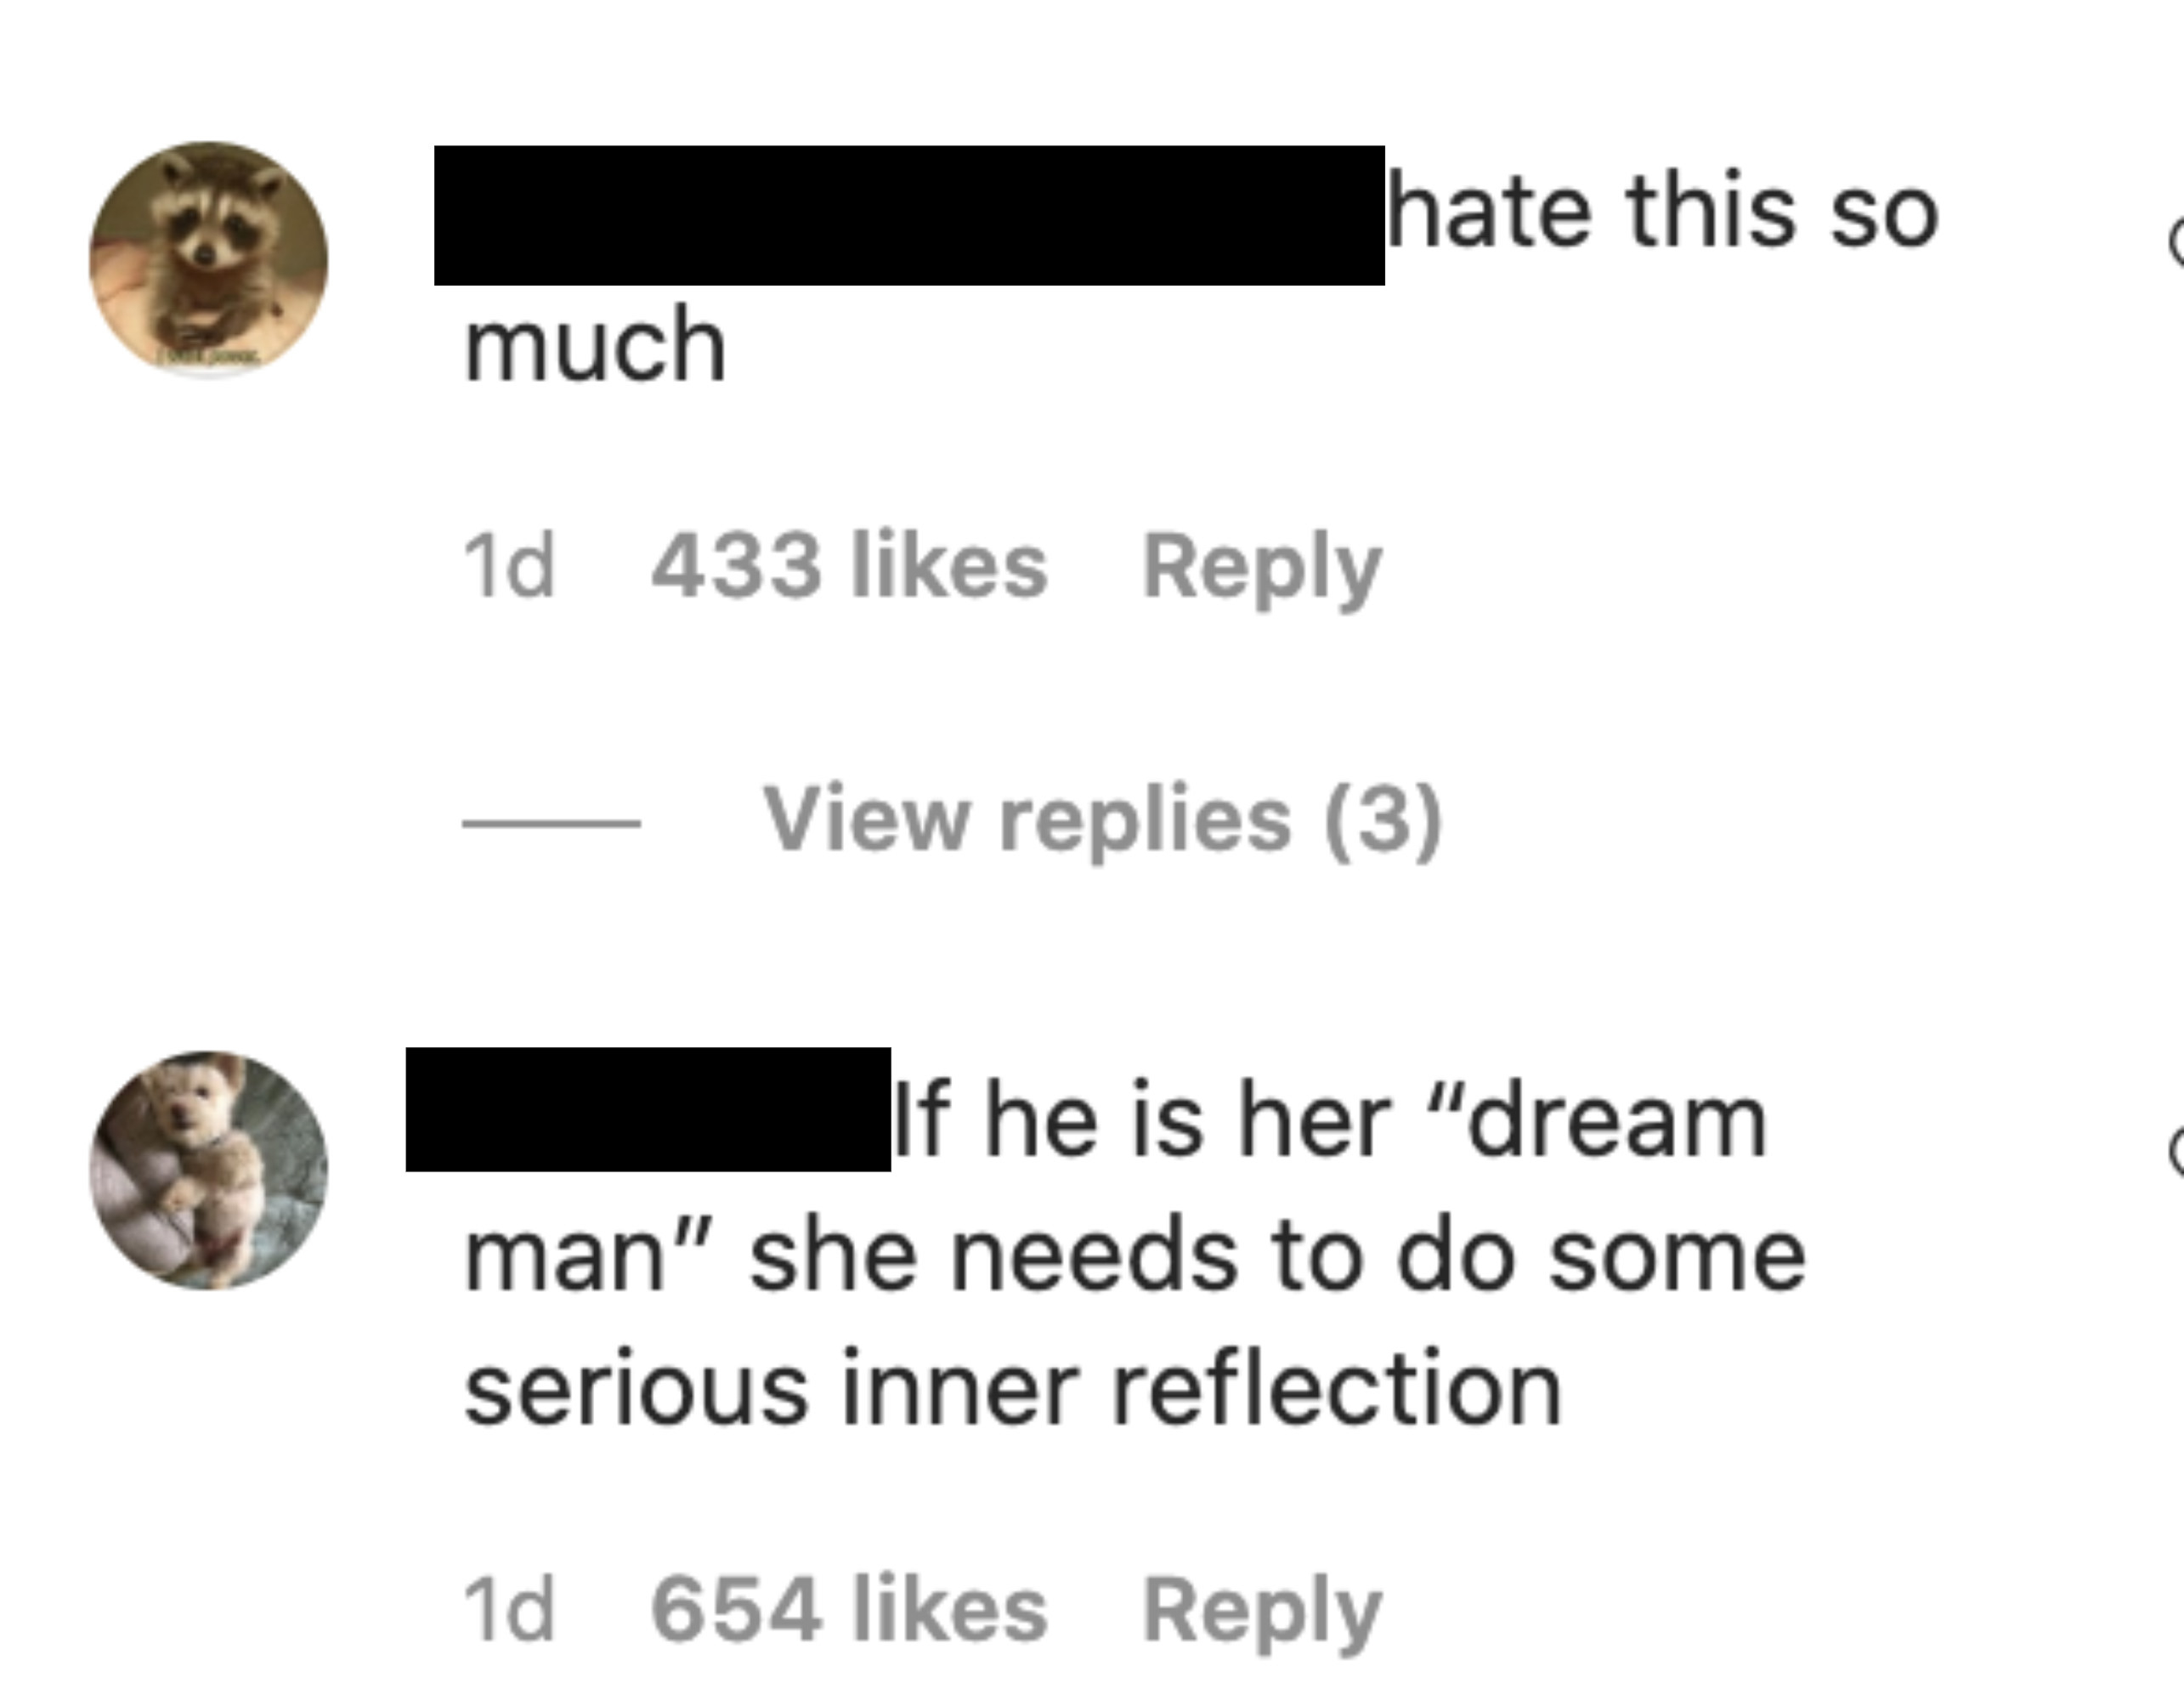 One person said, &quot;if her is her &#x27;dream man&#x27; she needs to do some serious inner reflection&quot;